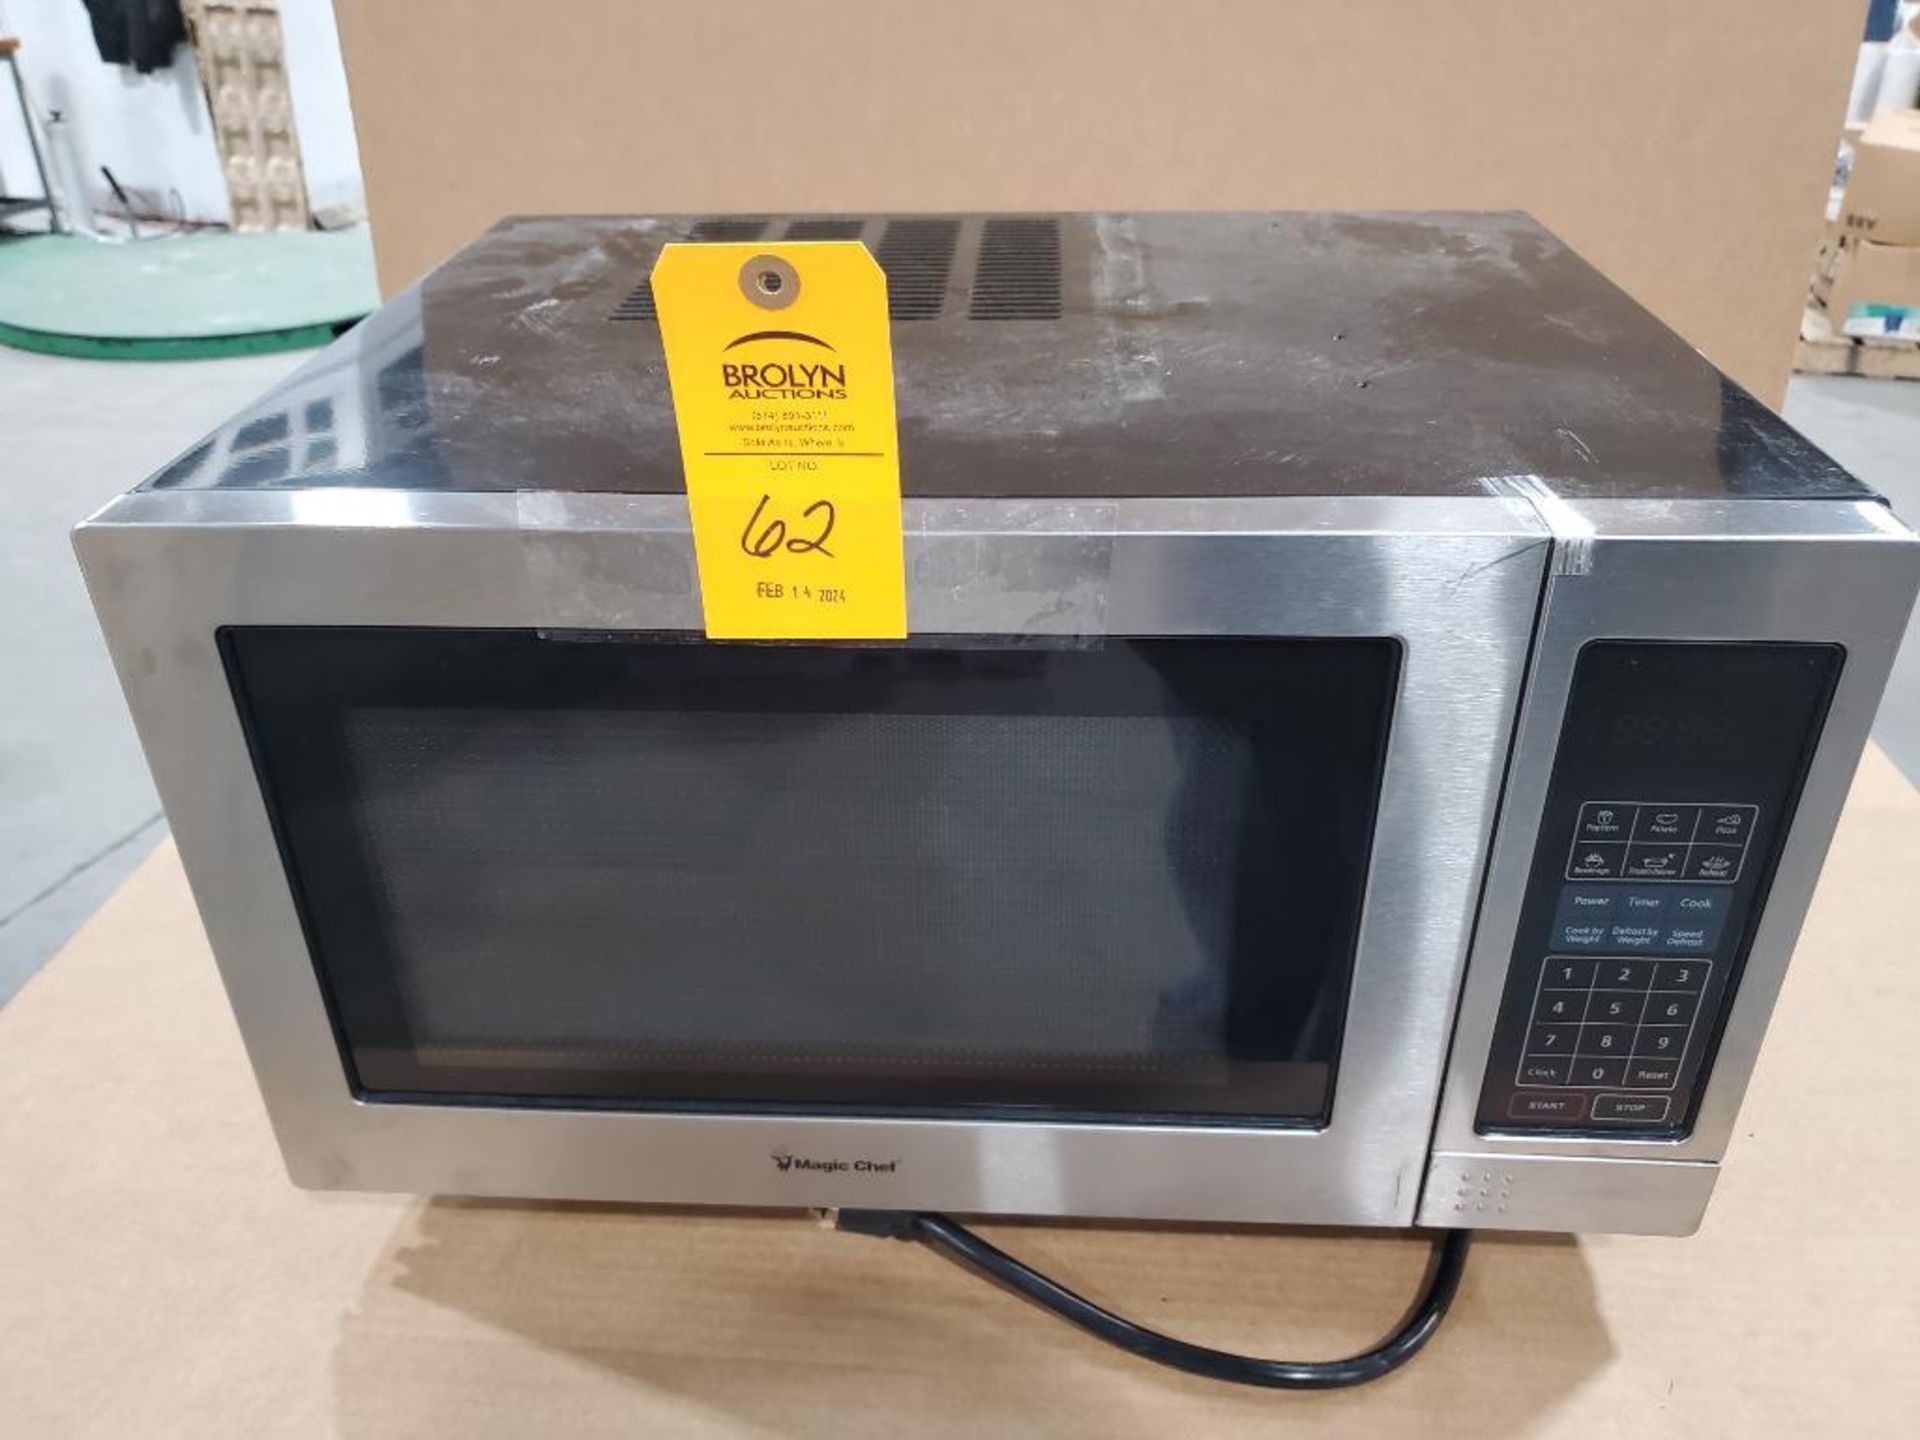 Magic Chef microwave oven.